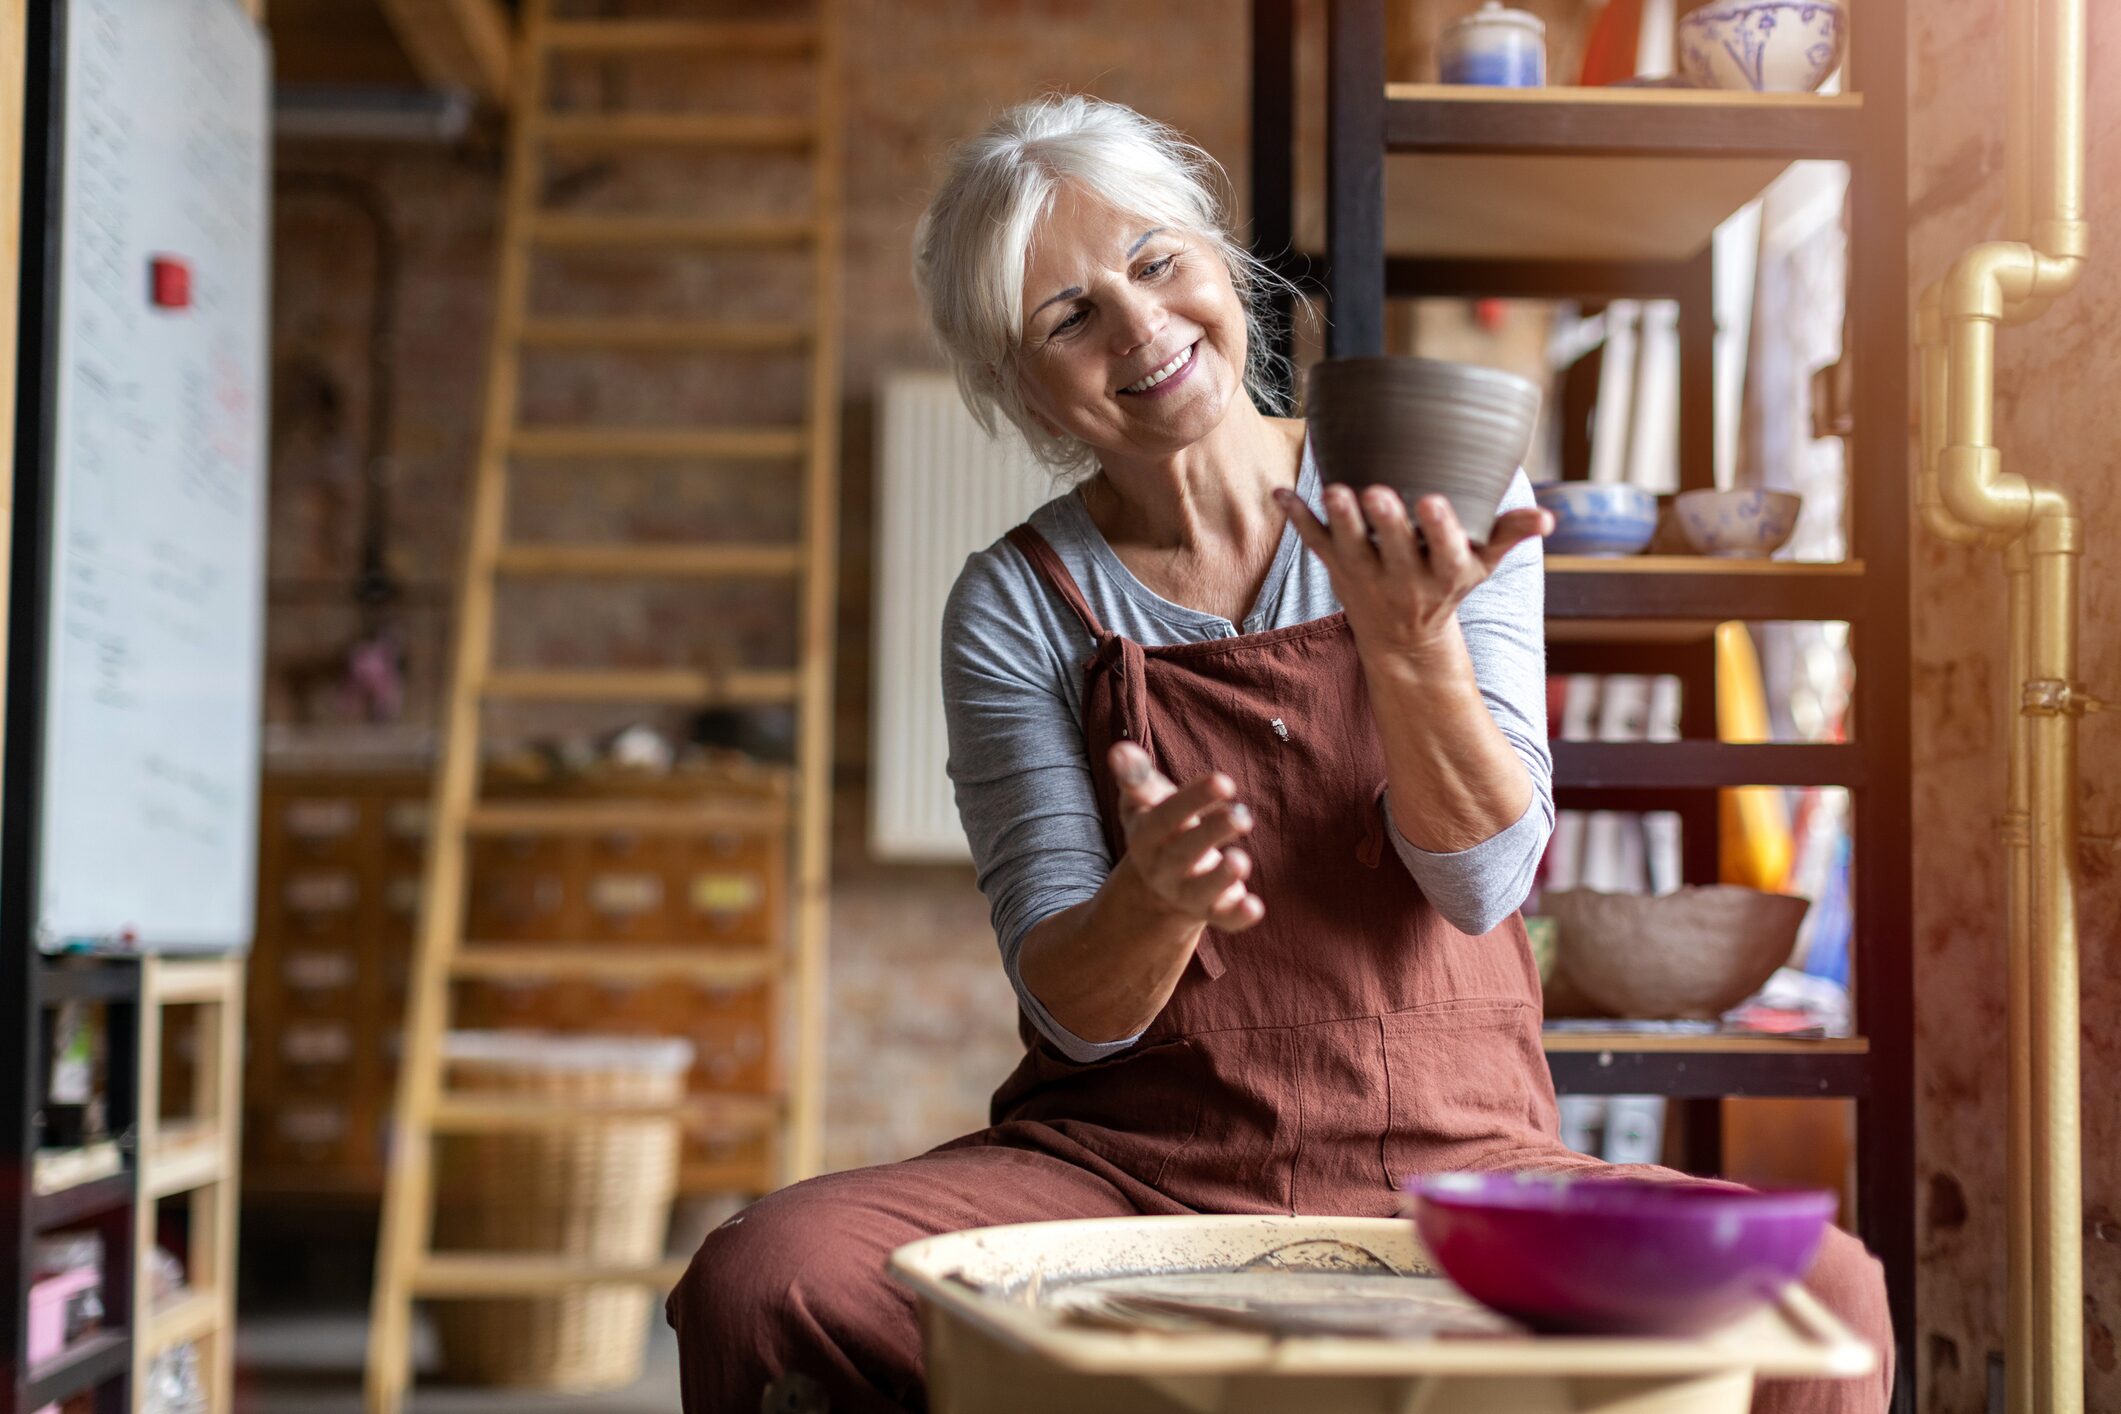 Turning a hobby into a hustle can generate income during retirement